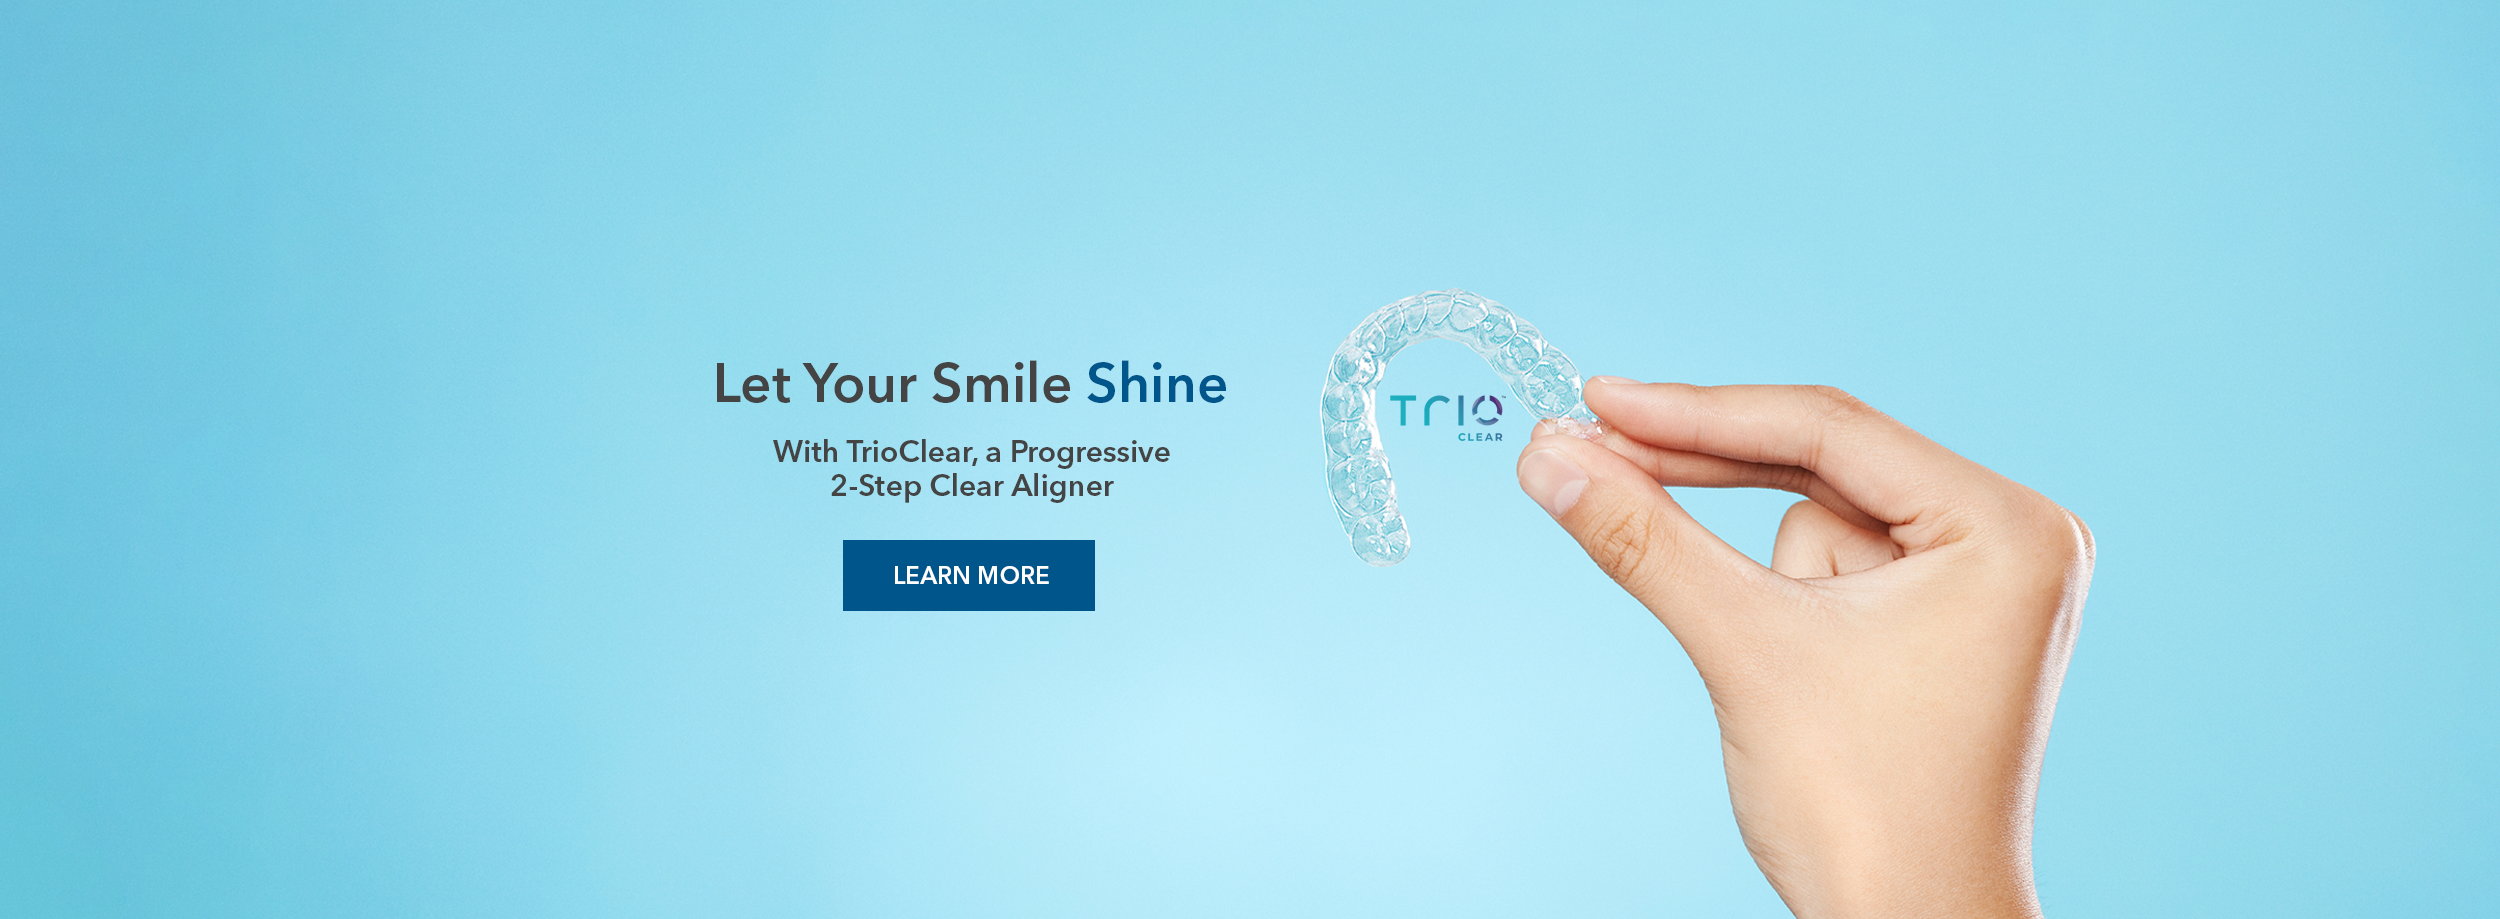 TrioClear_Let_Your_Smile_Shine_Web_Banner_MicroDental_Others.png